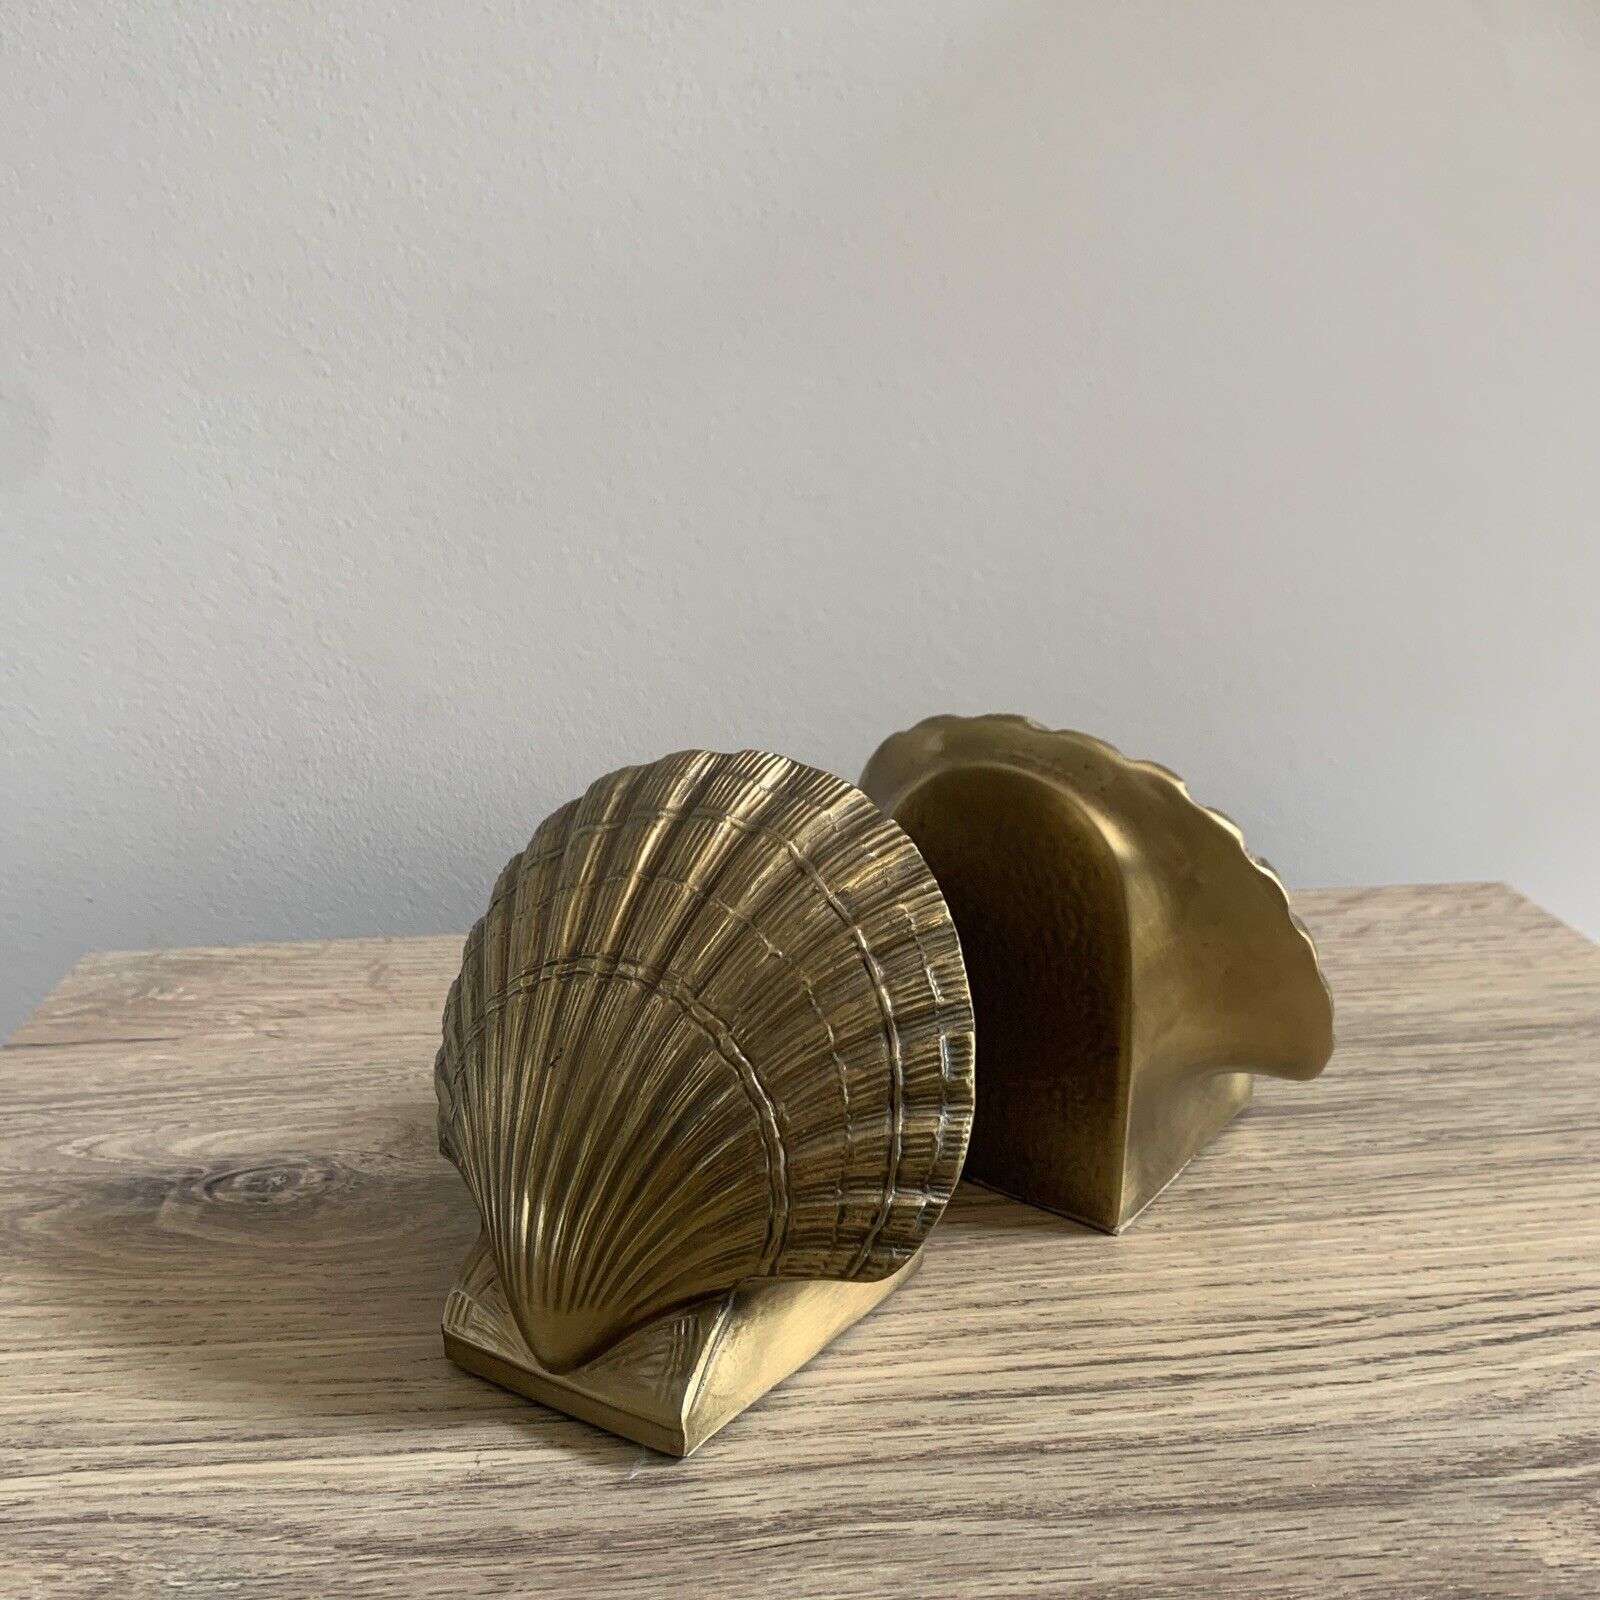 VTG Brass Nautical Clam Shell Seashell Bookends Thick and Heavy  2 lb Brand PMC